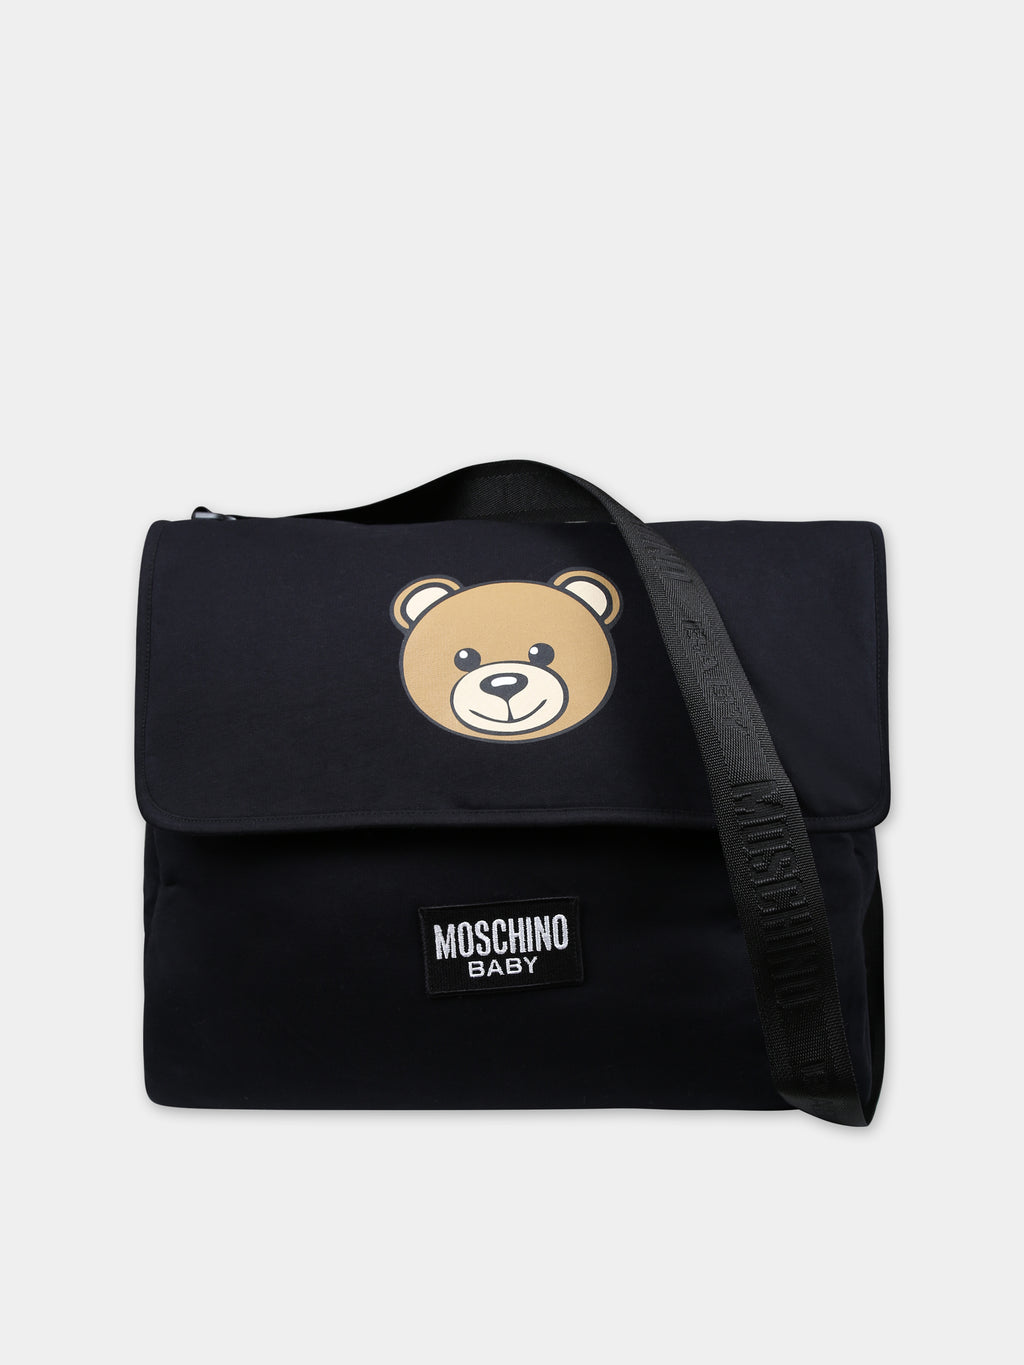 Black mother bag for babies with Teddy Bear and logo